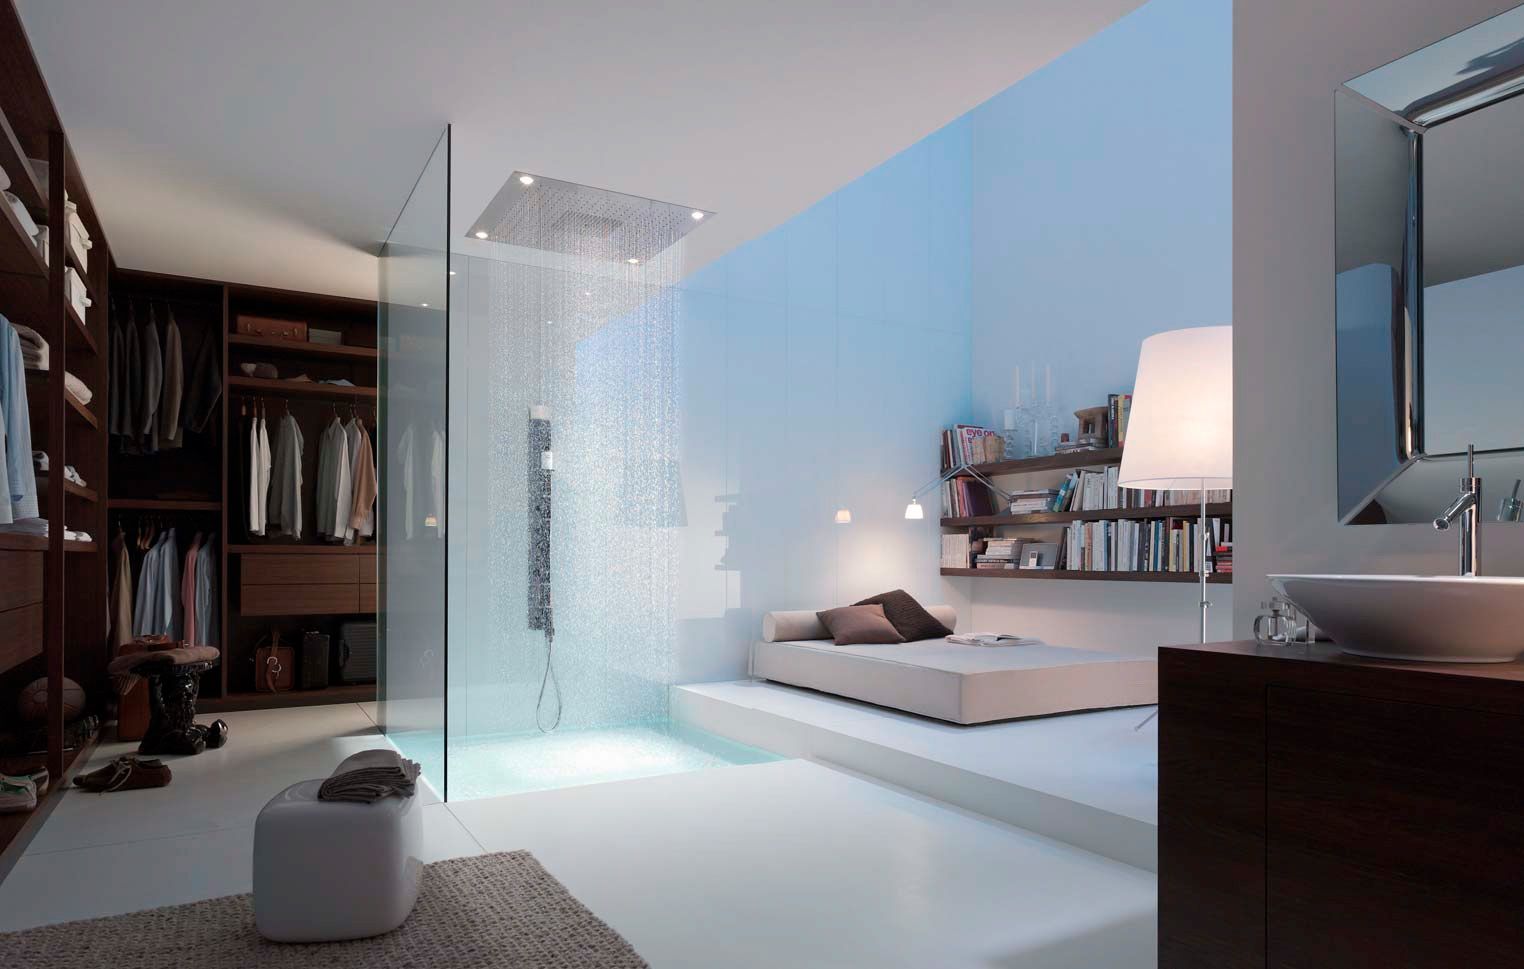 a minimalist white bedroom with a low bed and a large rain shower next to it is a cool idea with a neutral color scheme